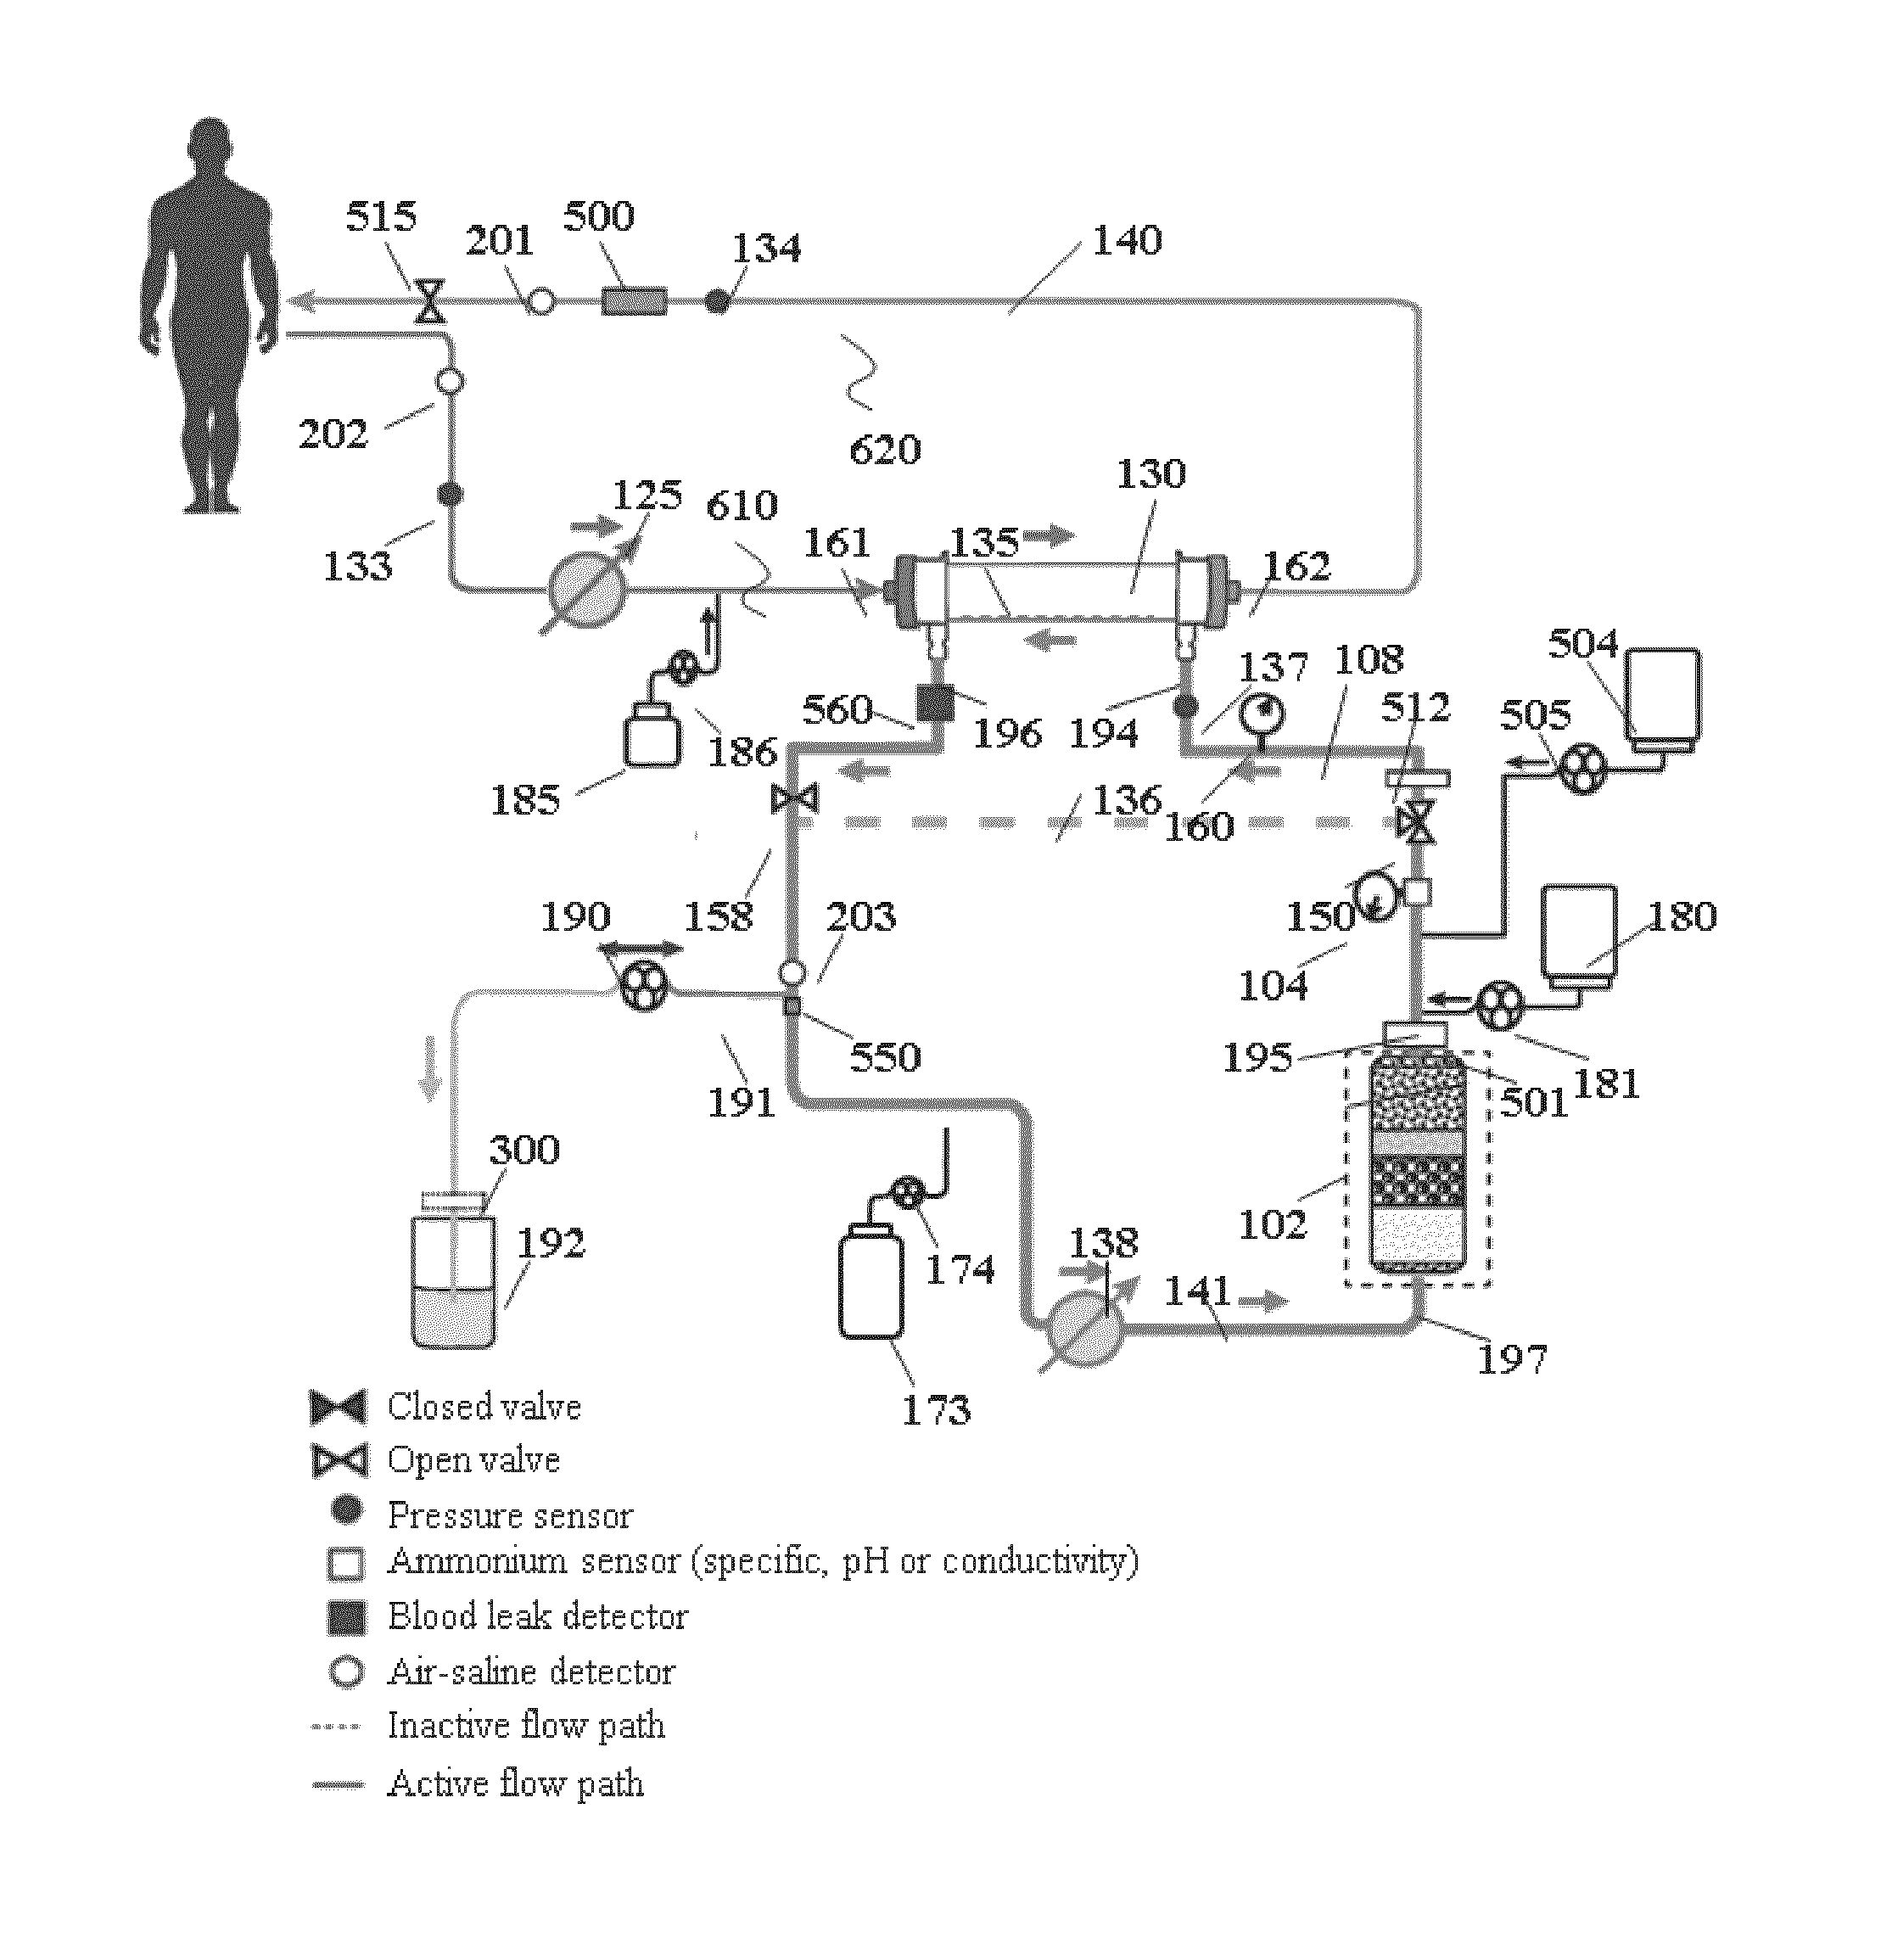 Hemodialysis system having a flow path with a controlled compliant volume